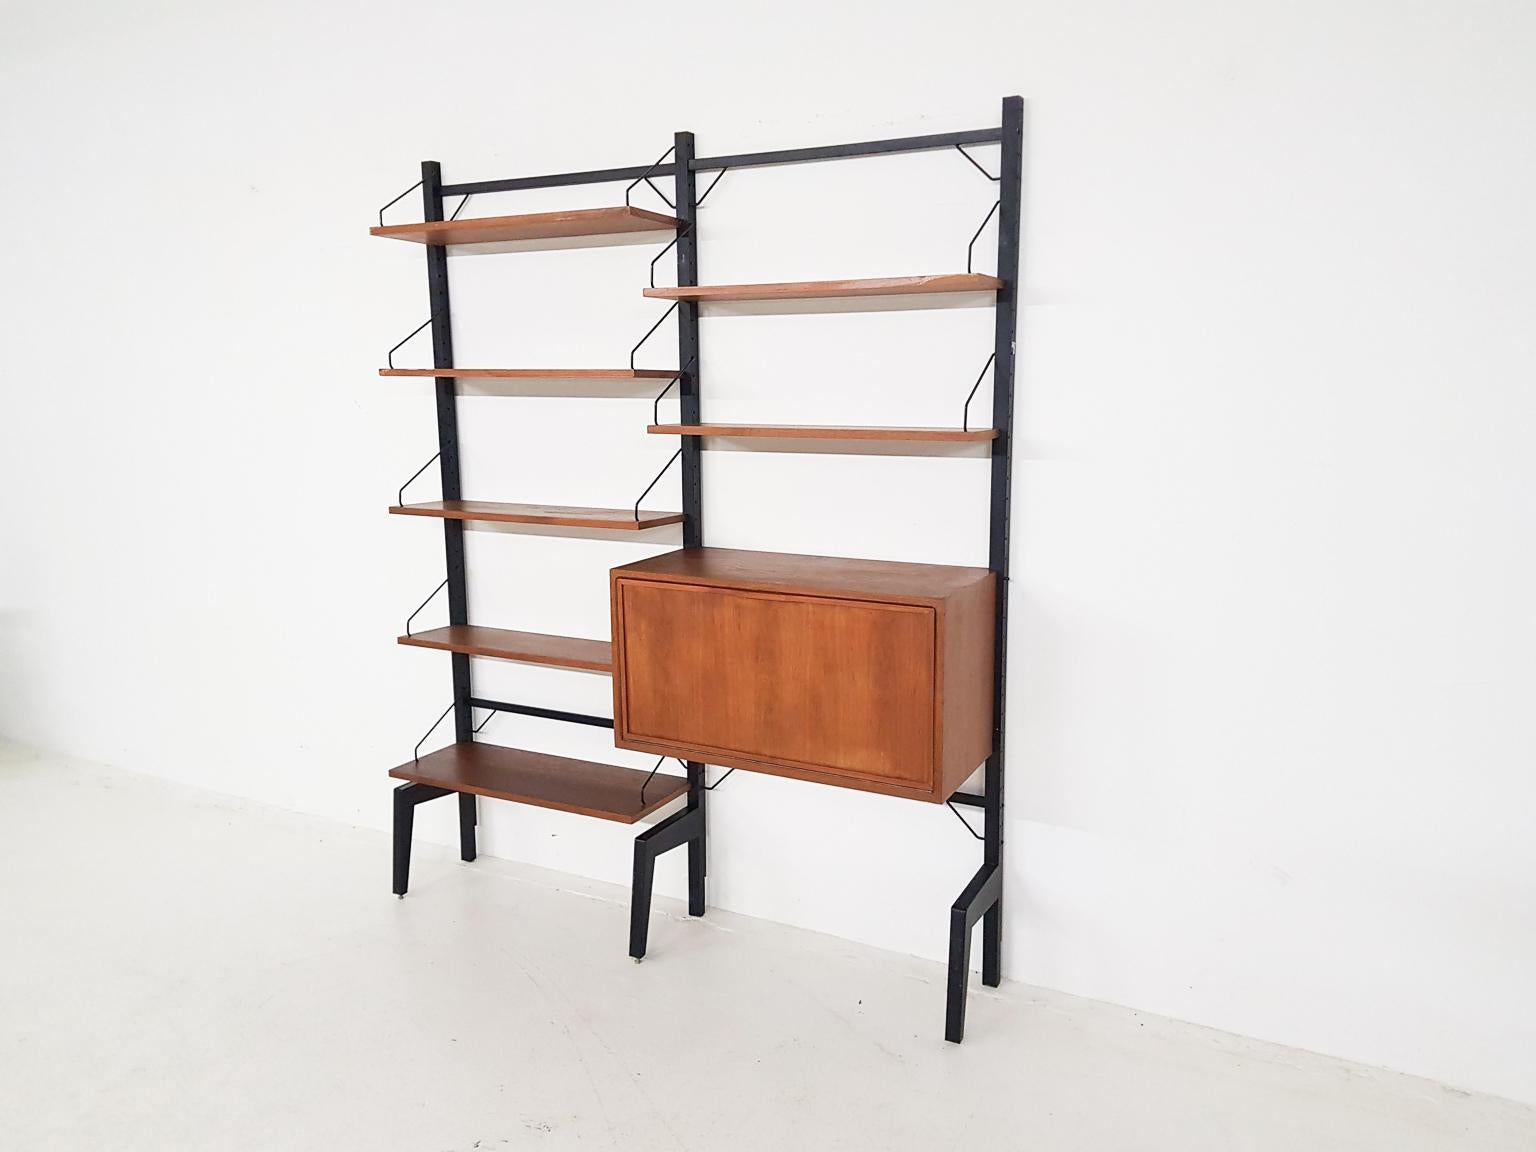 A Danish design wall system, shelving unit or bookcase by Poul Cadovius for Royal System, designed in Denmark in the 1950s.

This modular freestanding model by Poul Cadovius is designed so it can be positioned against a wall without drilling